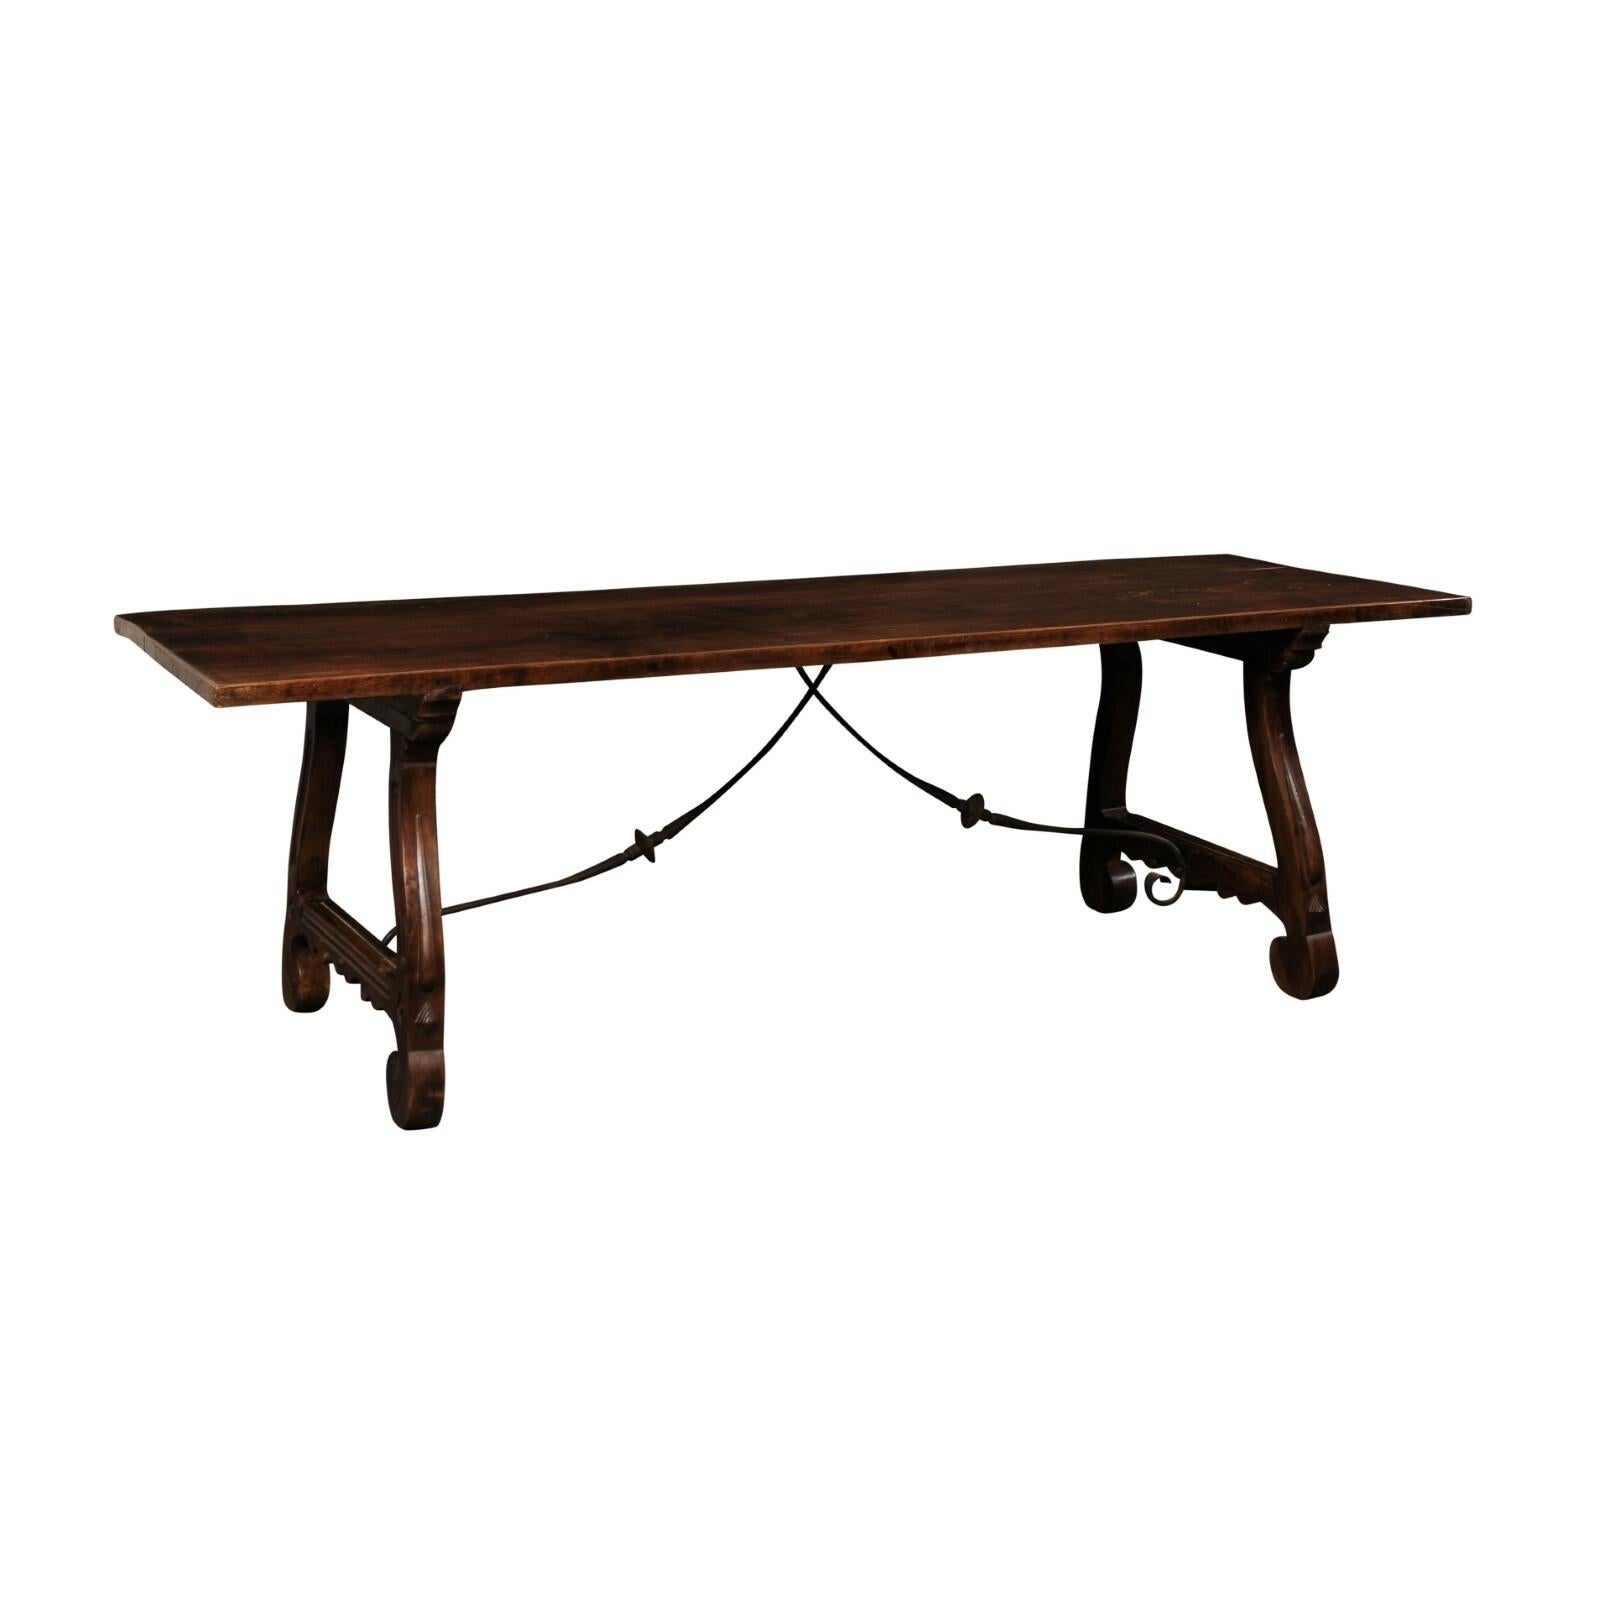 Spanish Carved Walnut Wood Trestle-Leg Table w/Forged Iron Stretcher, 8+ Ft Long For Sale